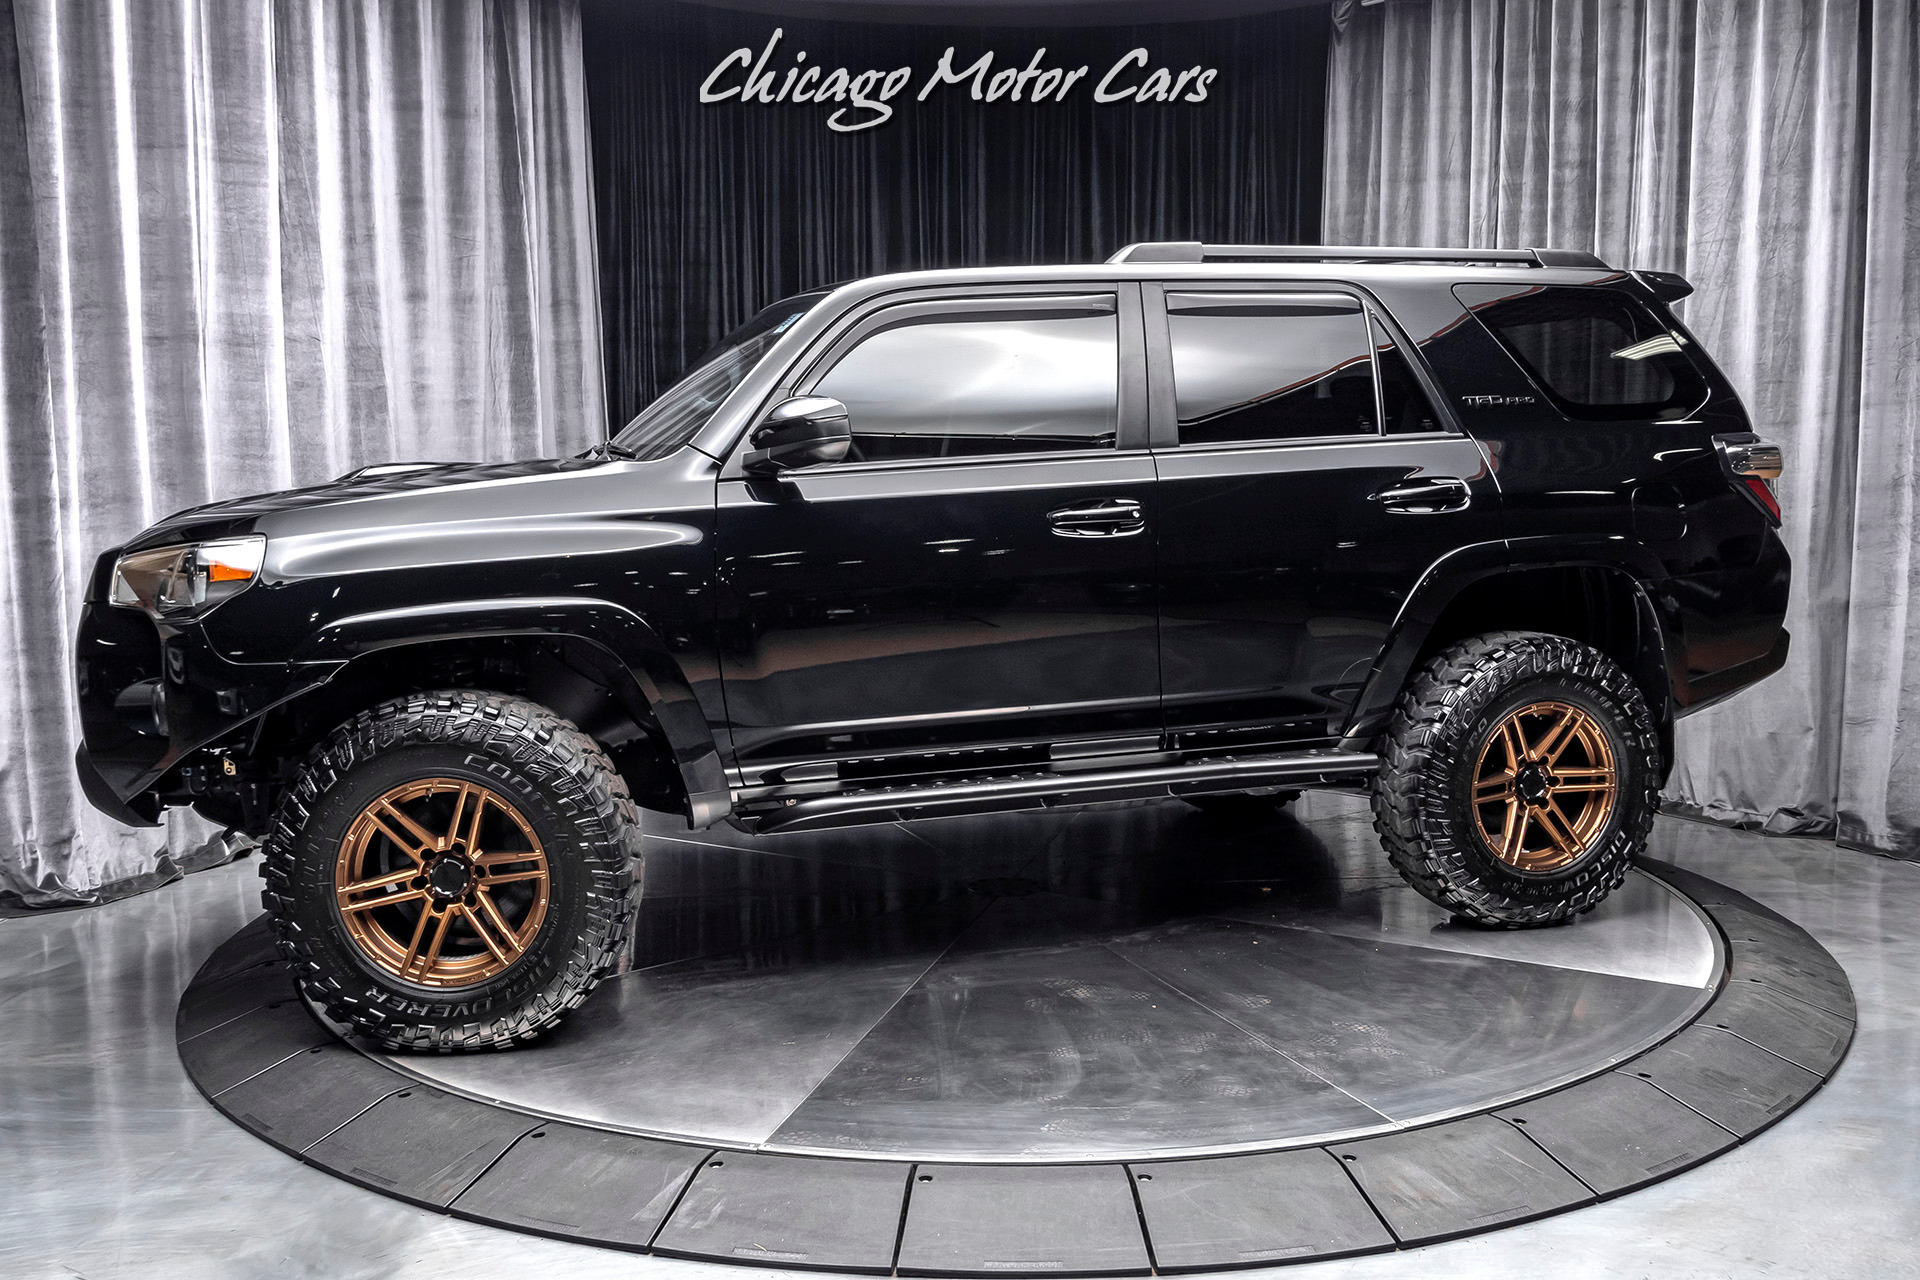 Used 15 Toyota 4runner Trd Pro 4x4 Suv 10k In Upgrades Low Miles Vorsteiner Wheels For Sale Special Pricing Chicago Motor Cars Stock a